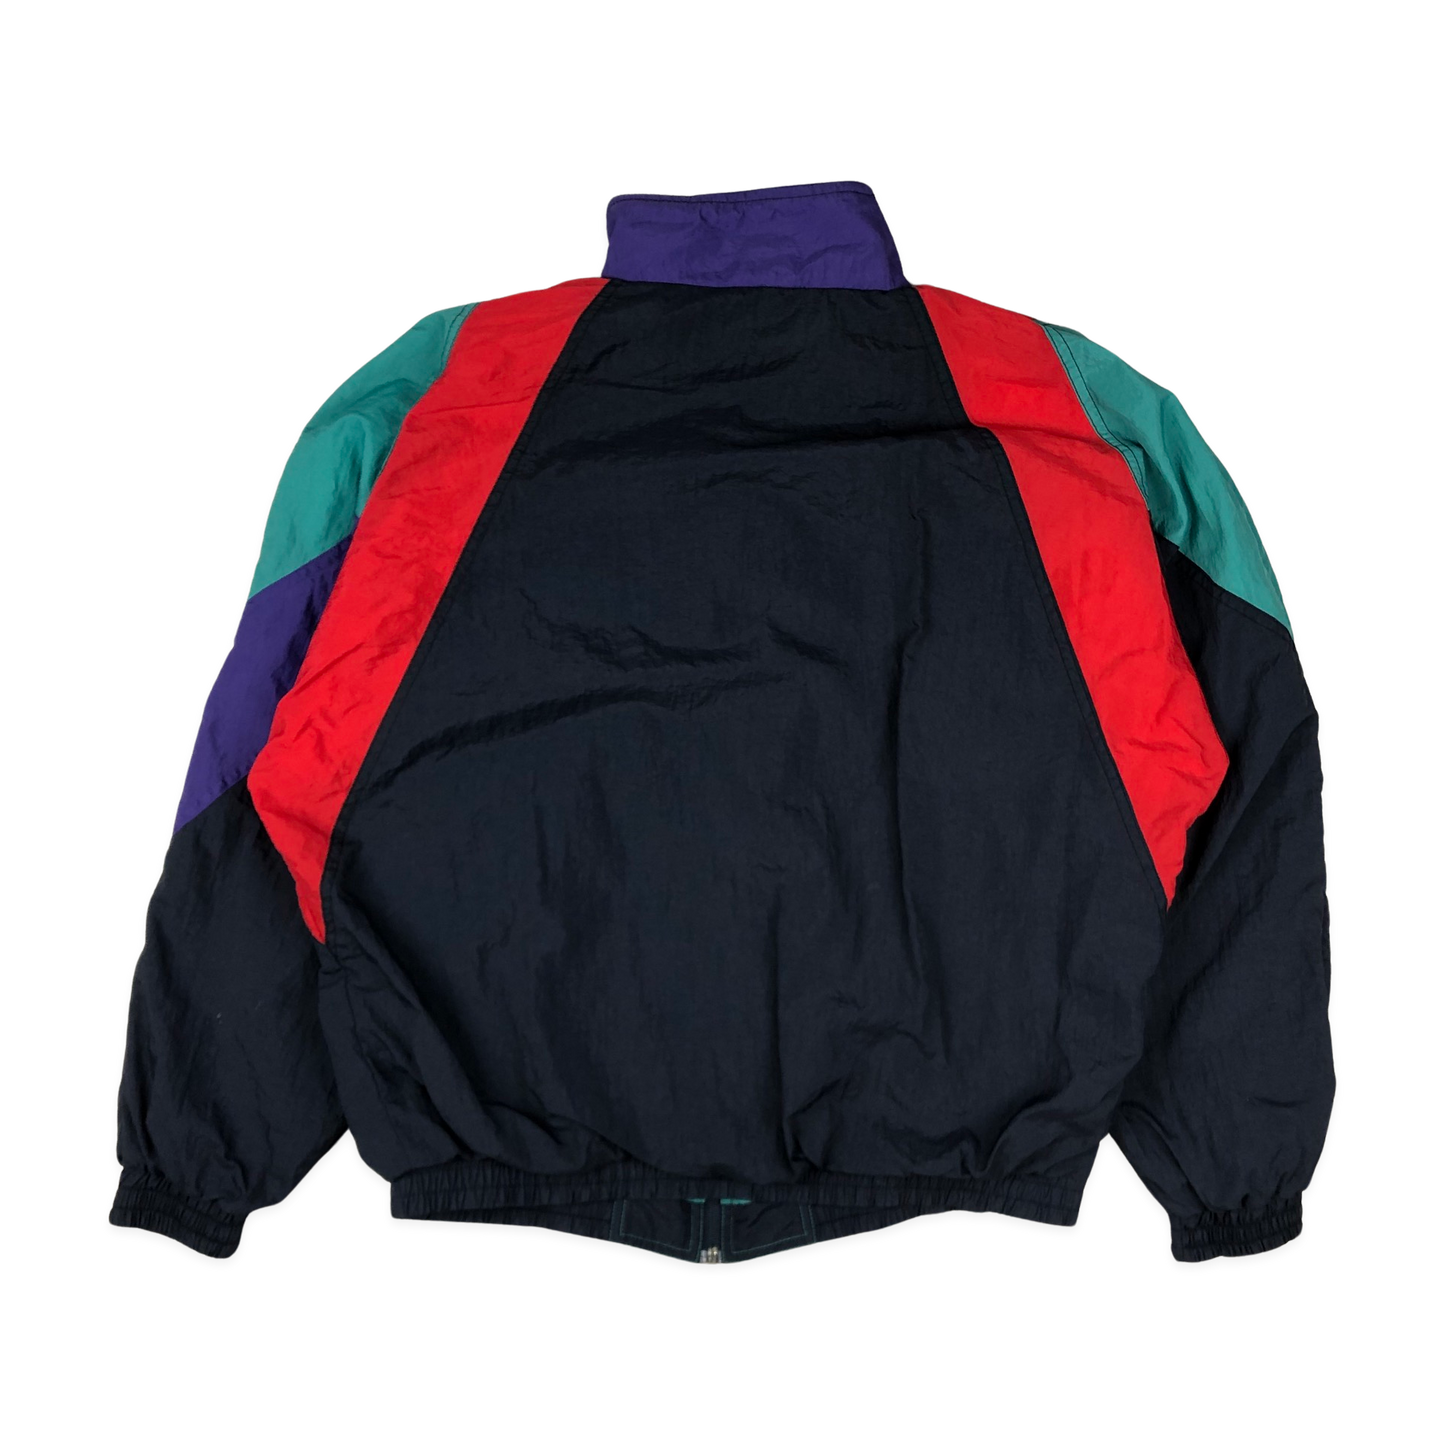 Vintage 90s Puma Black, Teal, Purple, and Red Shell Coat M L XL